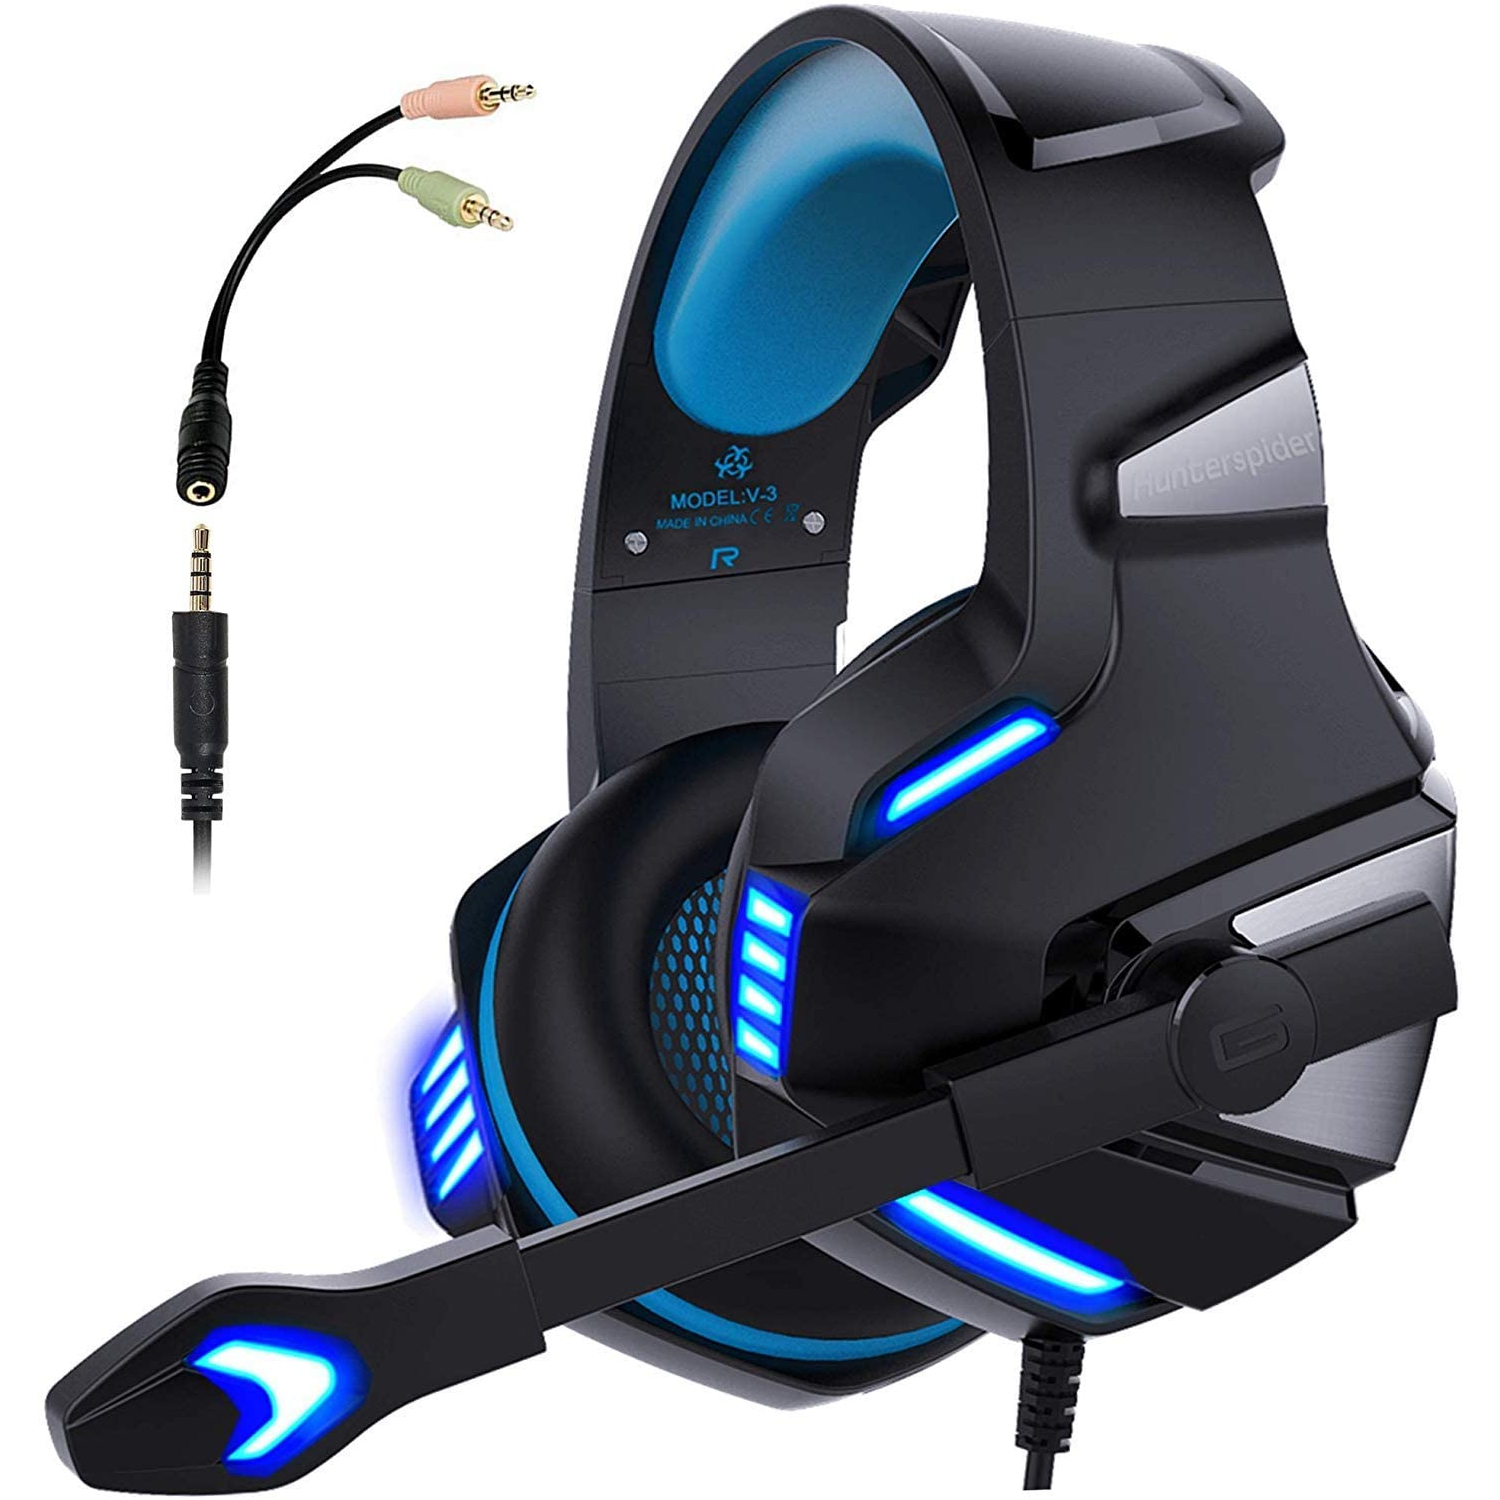 Gaming Headset for PS5 PS4 PC Xbox Series X, Noise Cancelling Over Ear Headphones with Mic, Bass Surround Gaming Headphones, Soft Memory Earmuffs, Computer Headphones